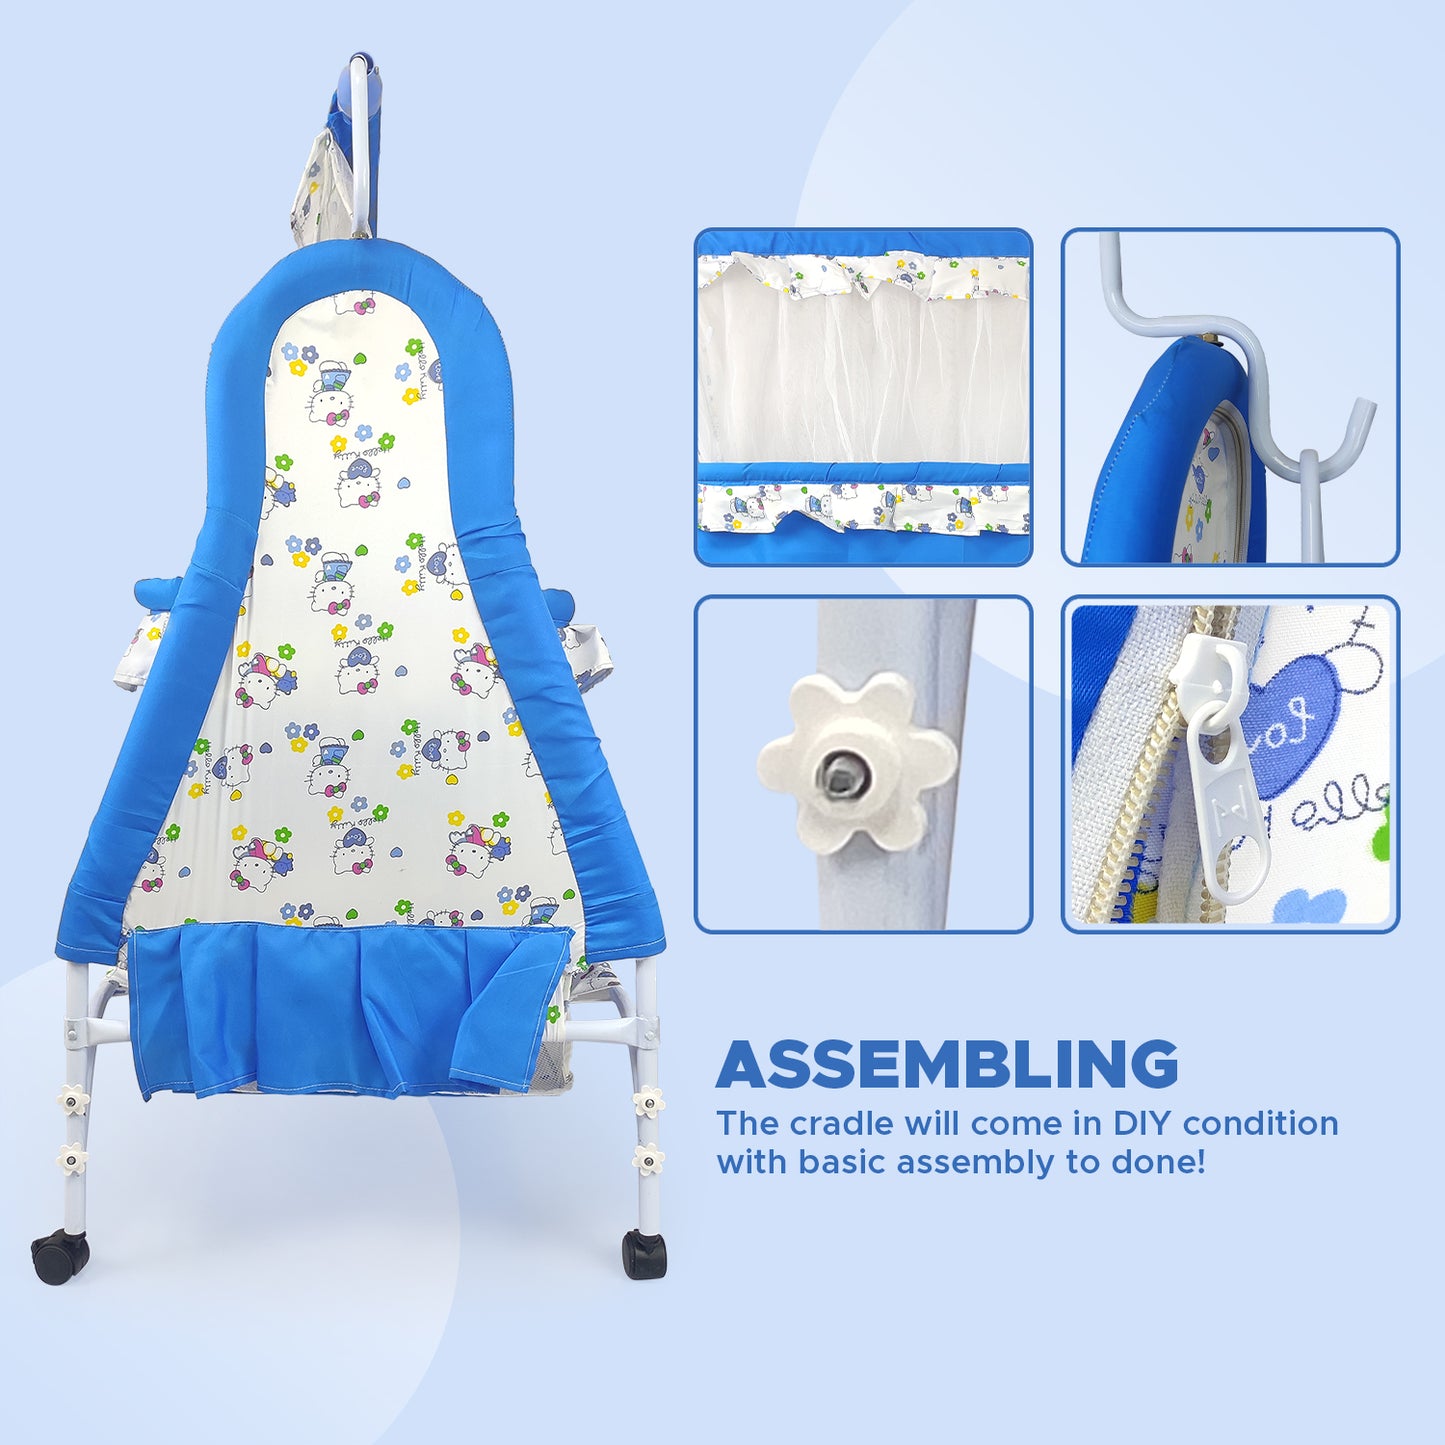 NHR New Born Baby Cradle with Removable Mosquito Protection Net & Storage Space, Cradle, Baby Jhula, Baby Palna, Zoli, Ghodiyu, Palana, Hammock, Baby Crib, Baby Cot, Baby Swing for 0 to 2 Years, Hindola, Jhula For Babies, Sleeping Palna for Babies (Blue)